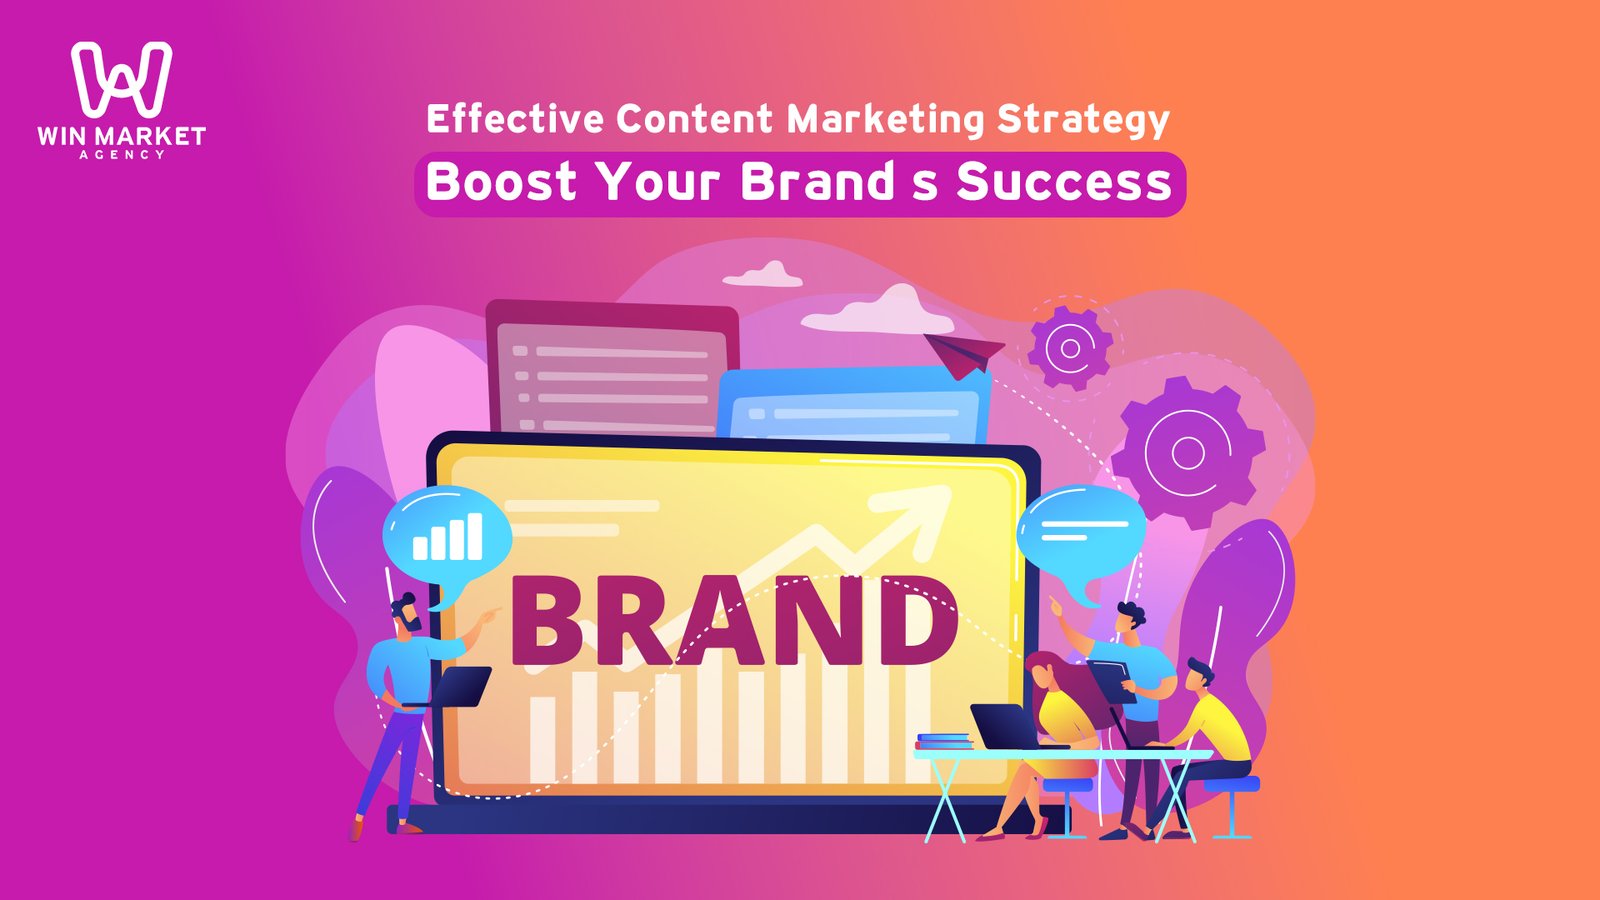 Effective Content Marketing Strategy: Boost Your Brand’s Success